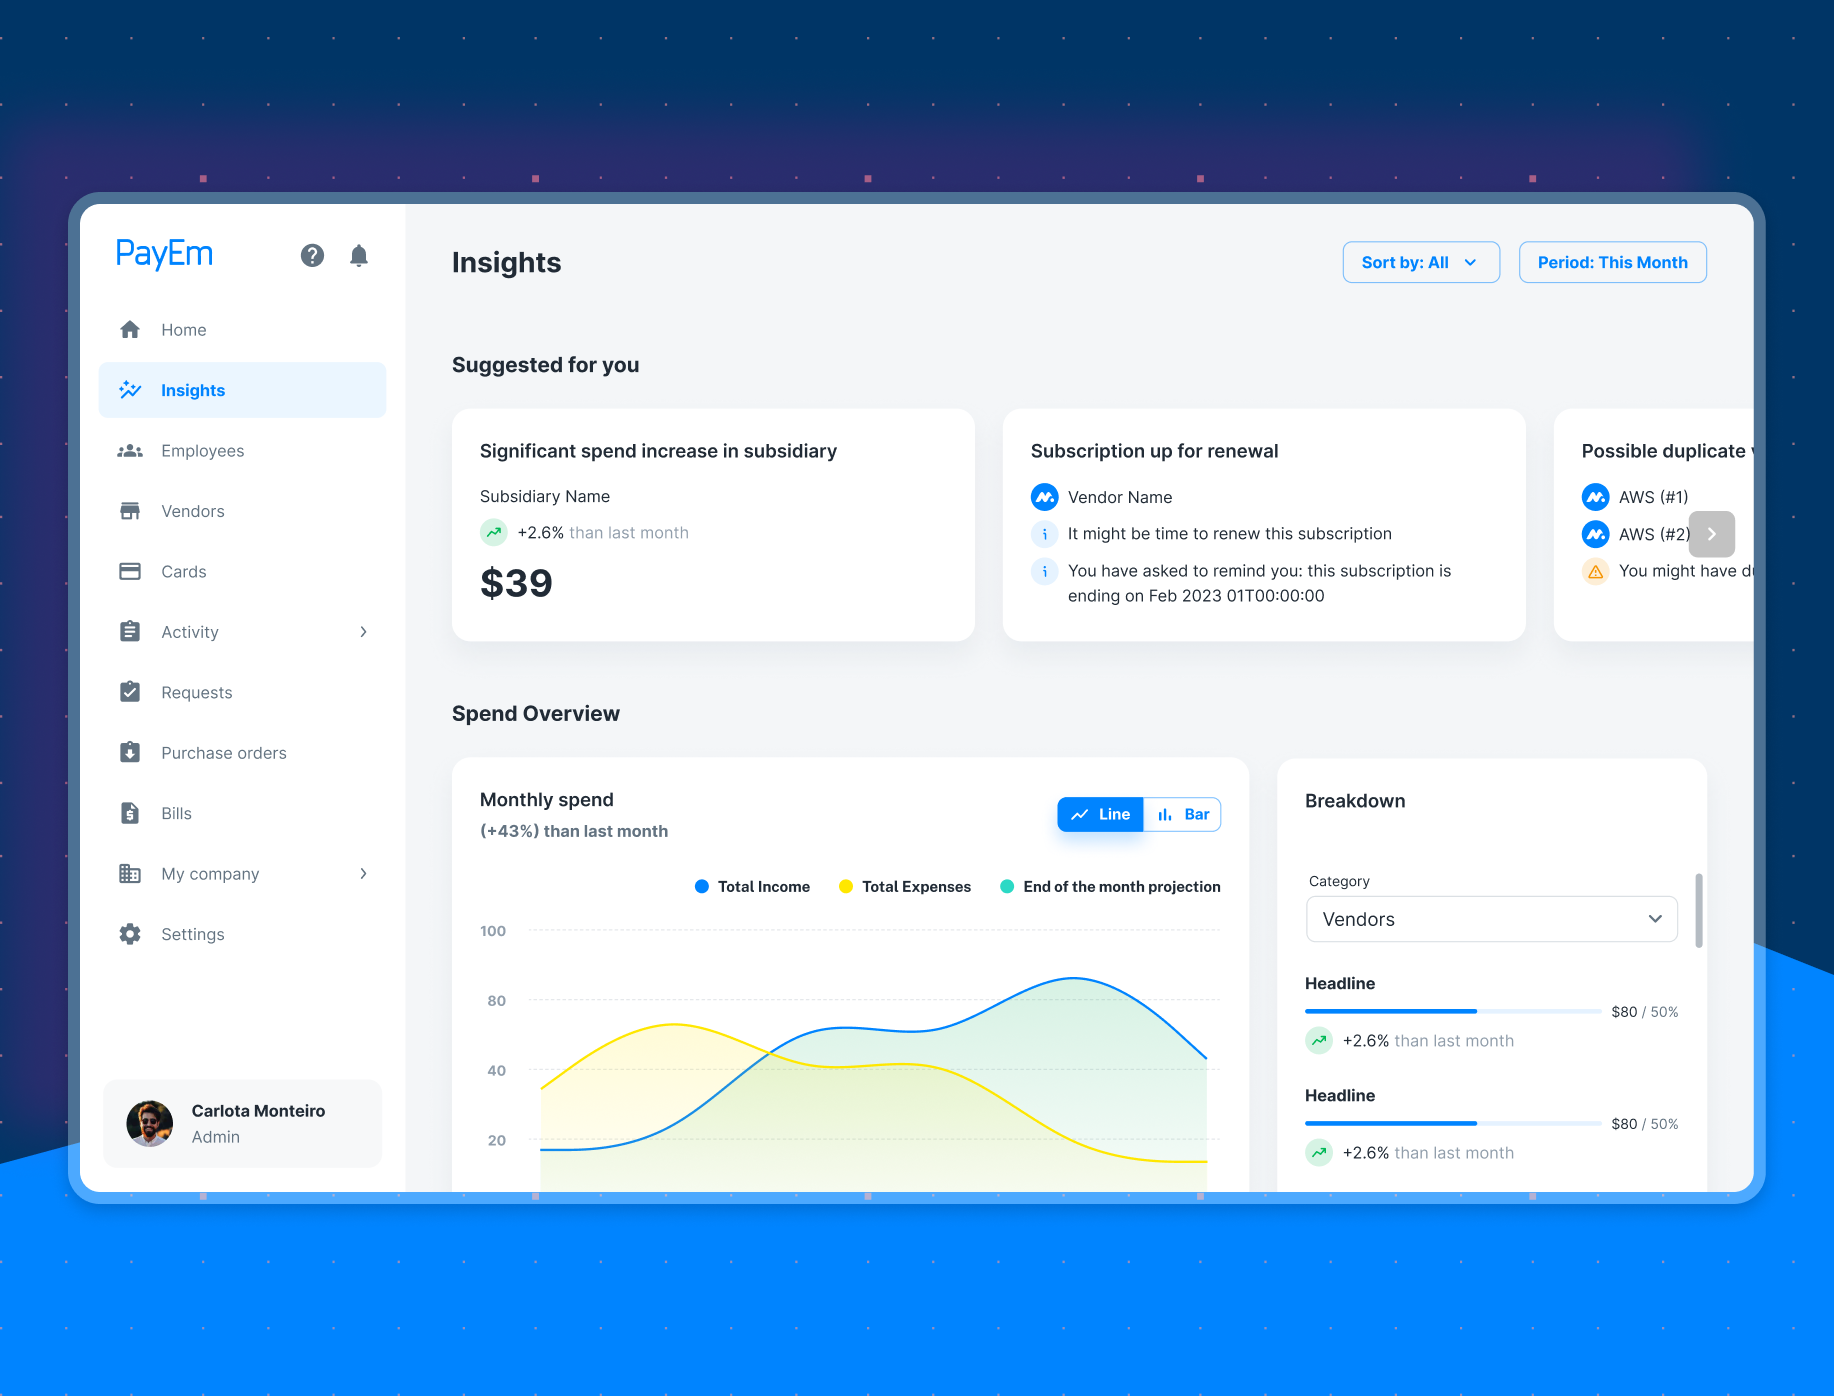 Insights section